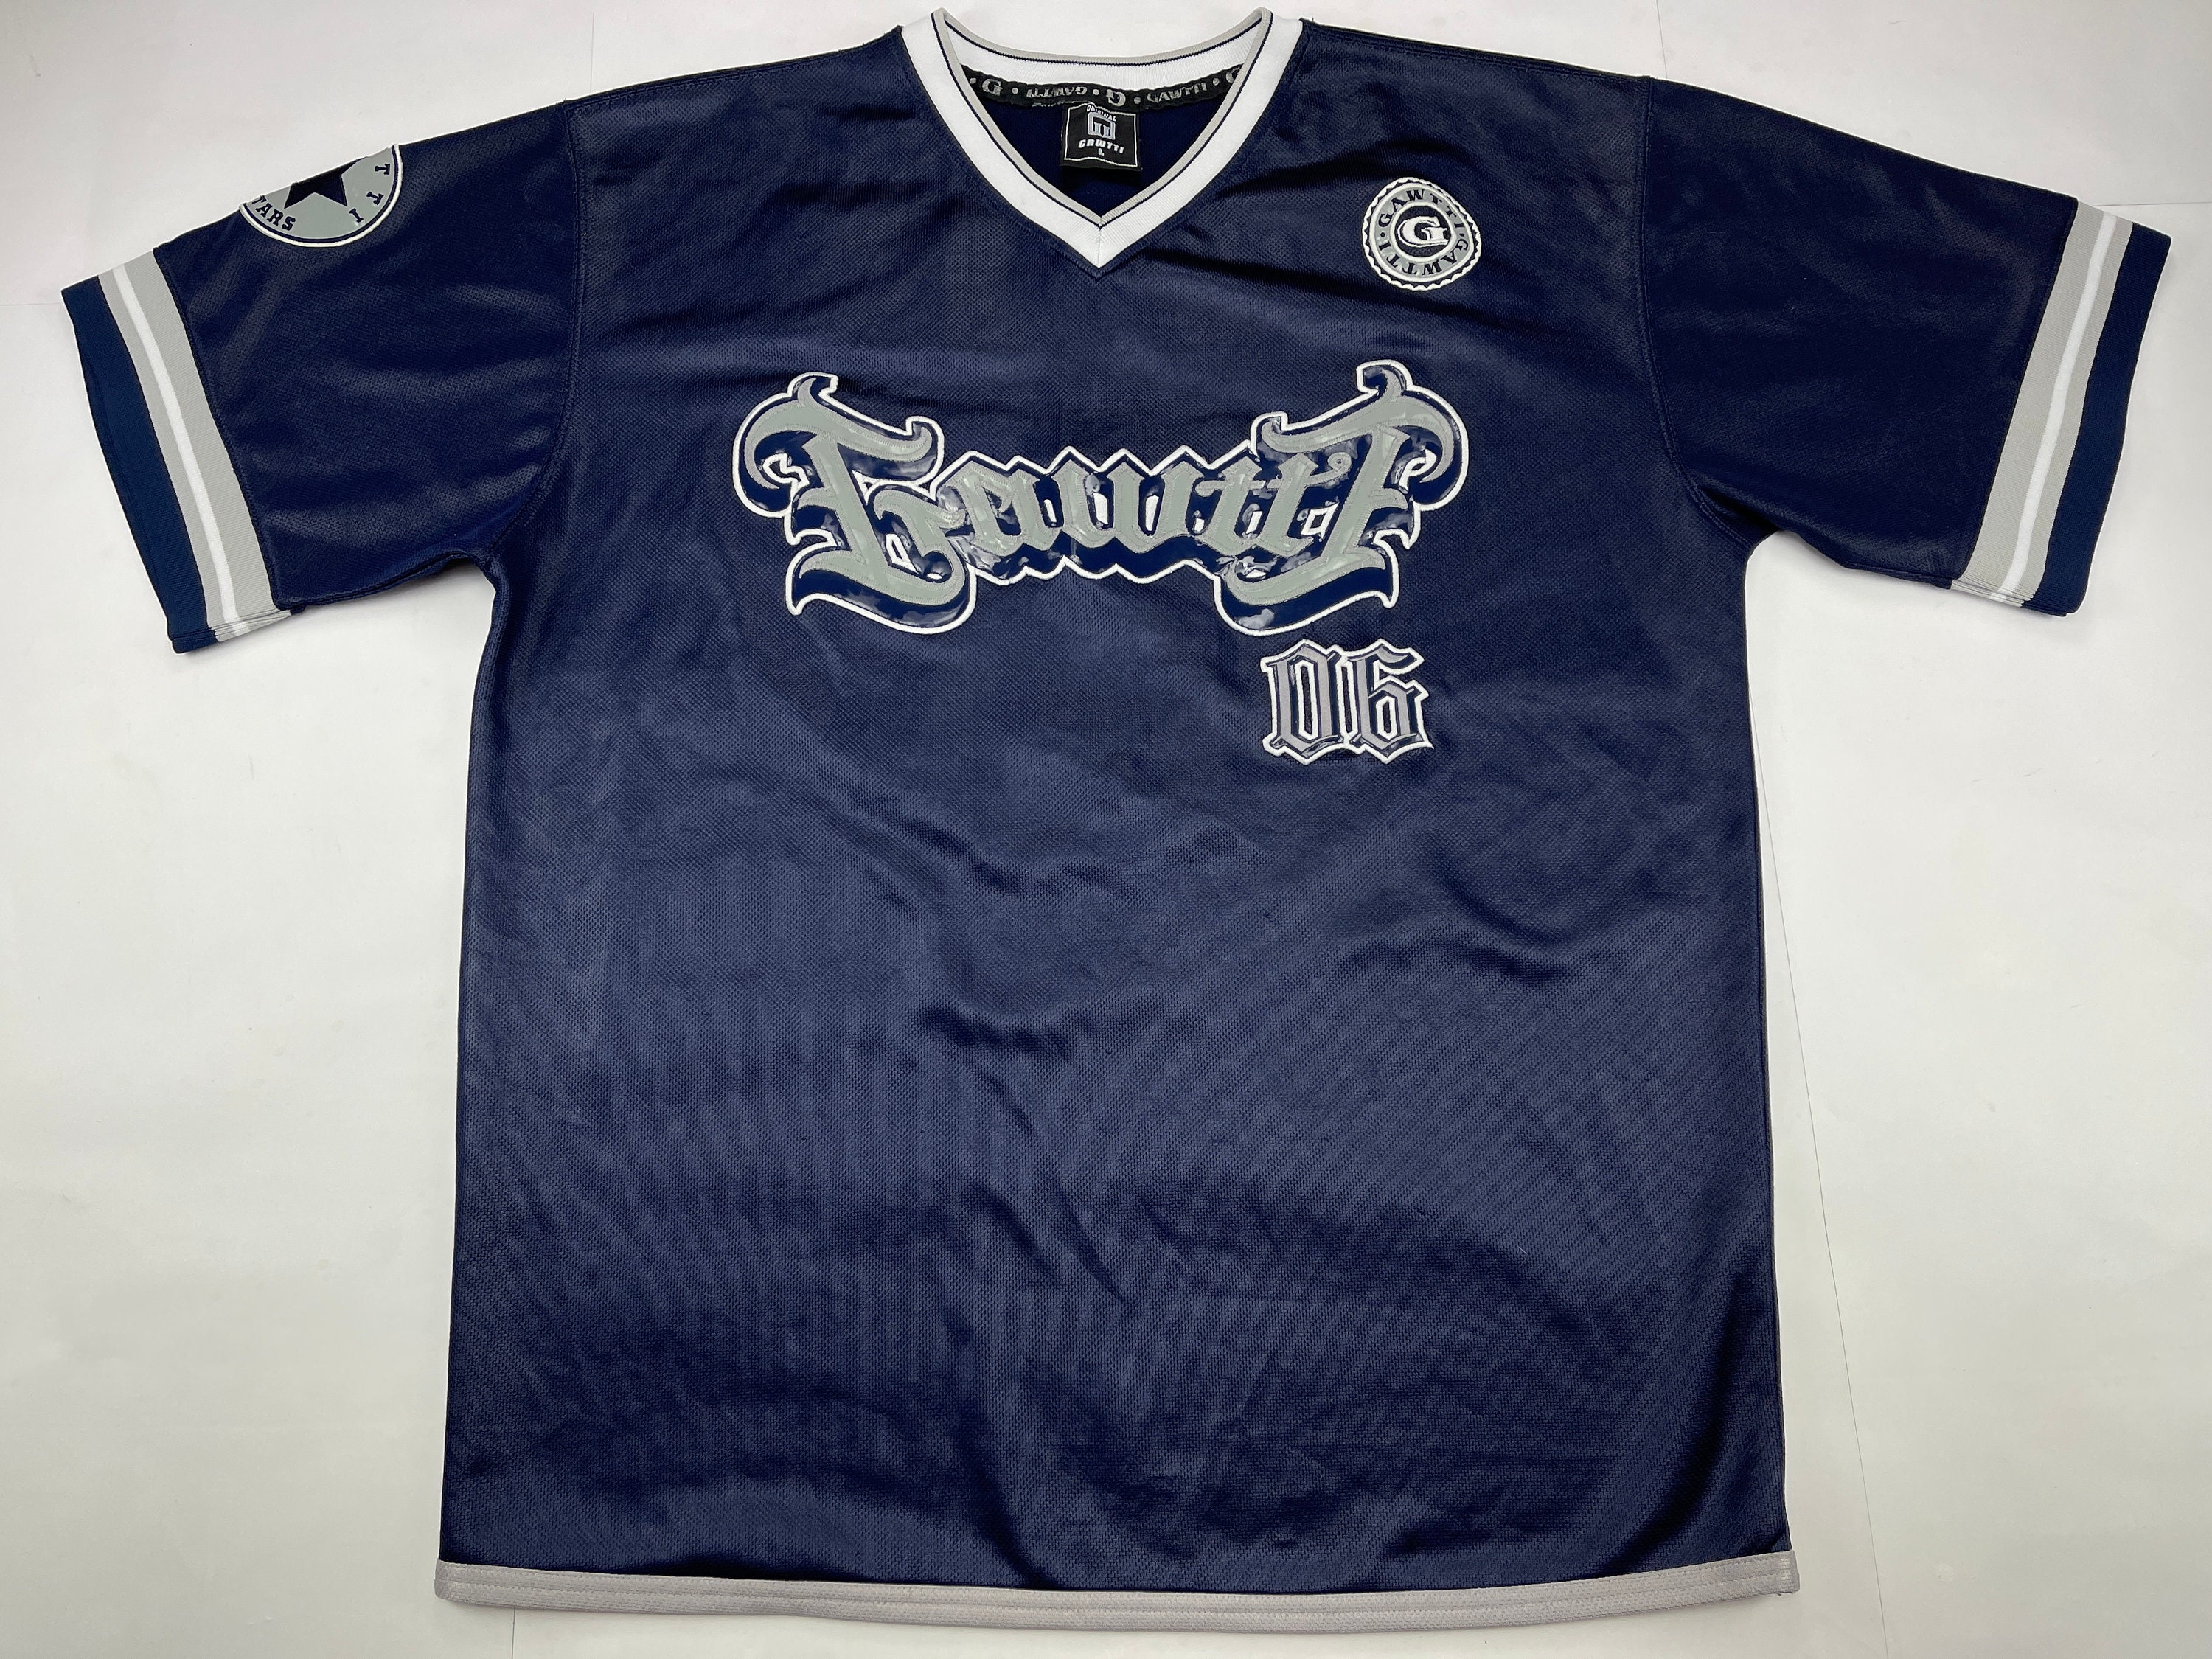  Conway #96 USA Jersey Blue, 90S Hip Hop Clothing for Party,  Stitched Letters and Numbers S-XXXL : Clothing, Shoes & Jewelry